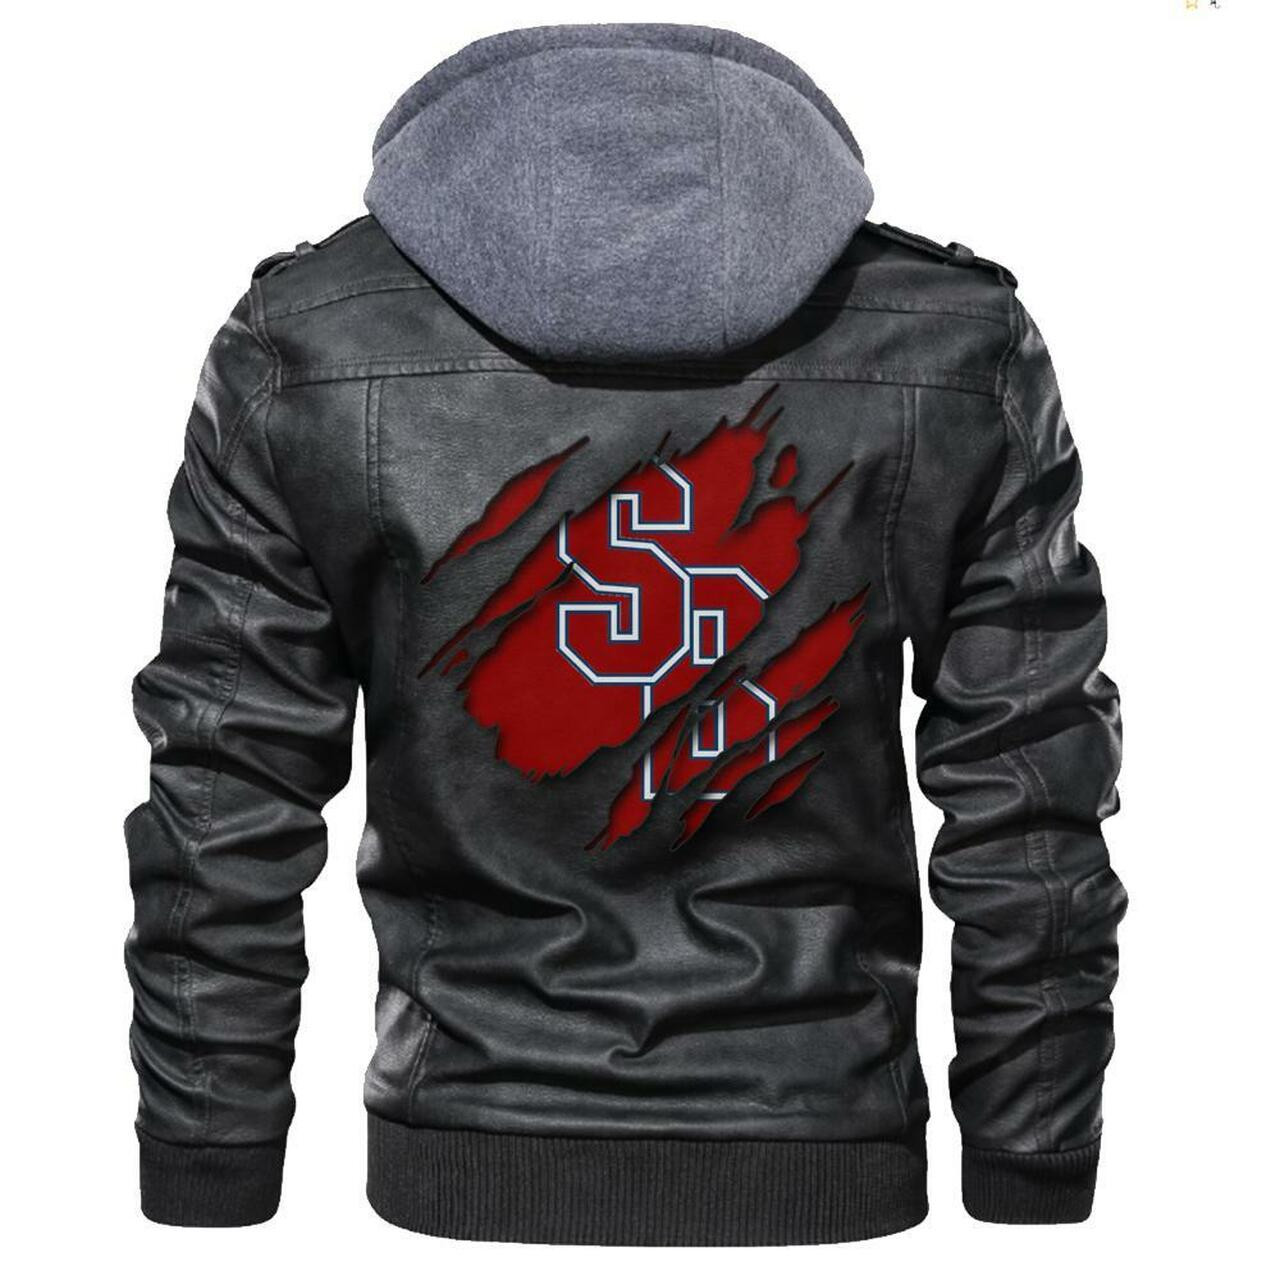 Don't wait another minute, Get Hot Leather Jacket today 60